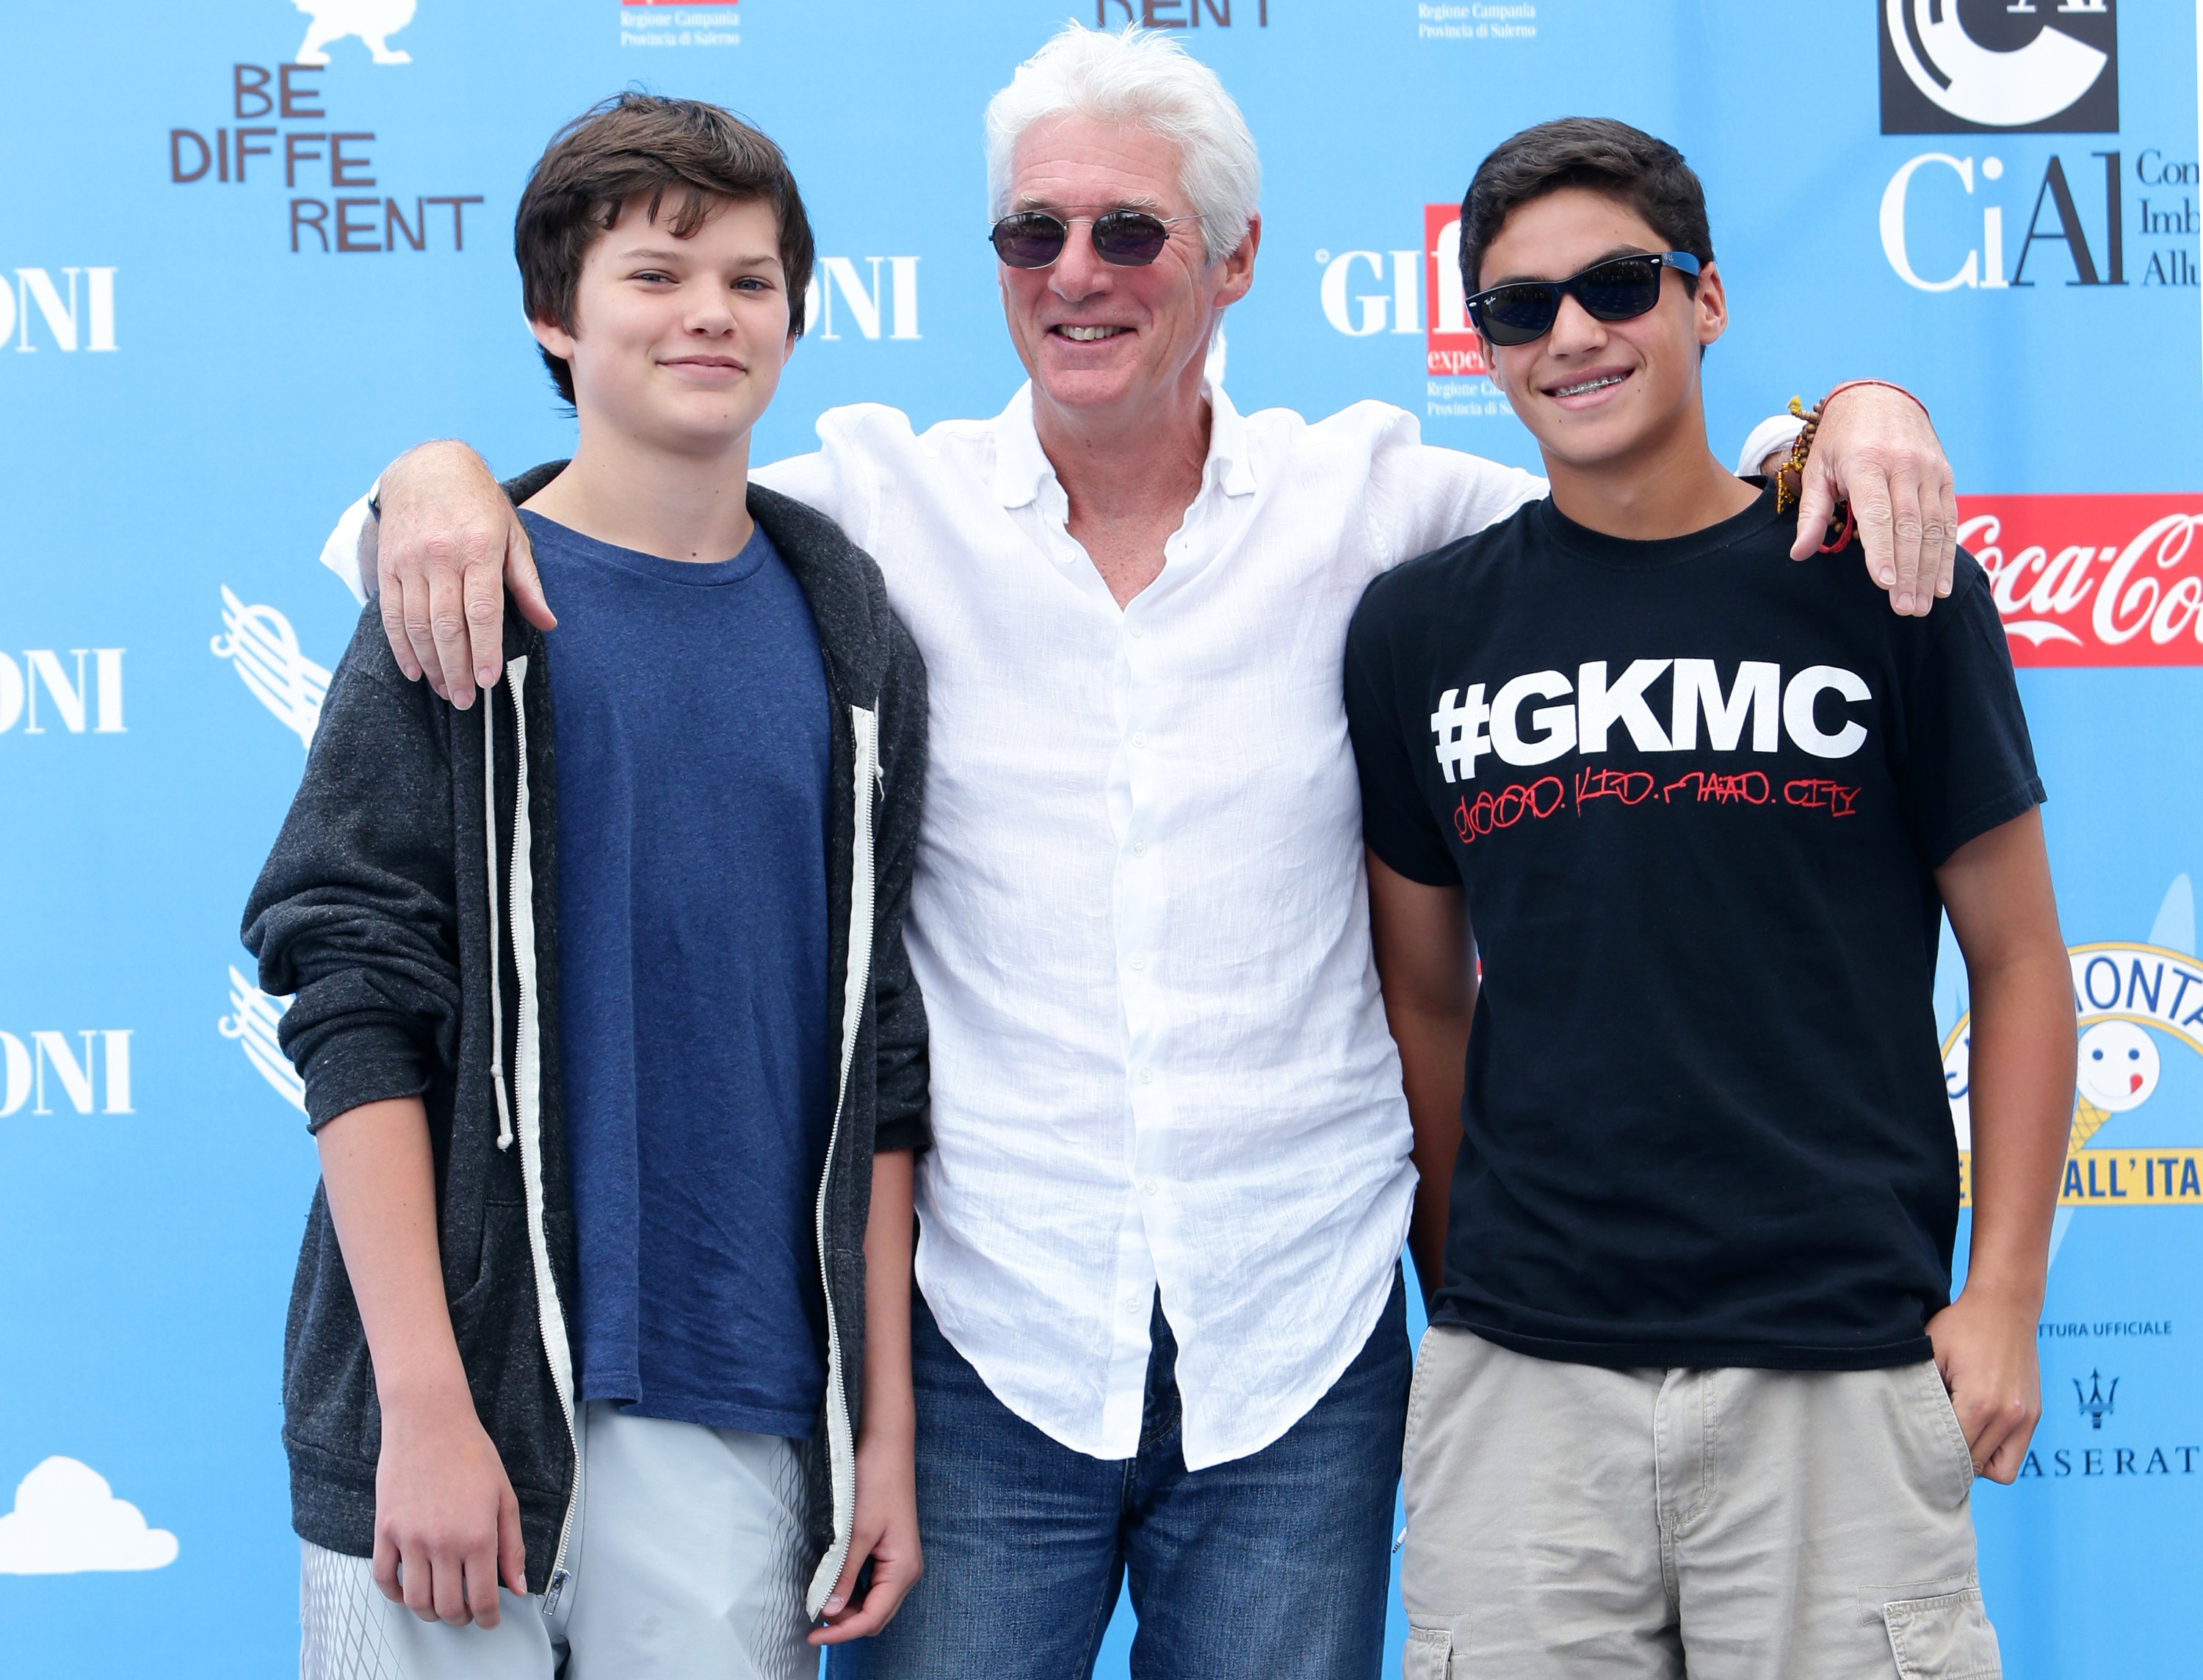 Richard Gere, Homer James, and a friend attend Giffoni Film Festival photocall on July 22, 2014, in Giffoni Valle Piana, Italy. | Source: Getty Images